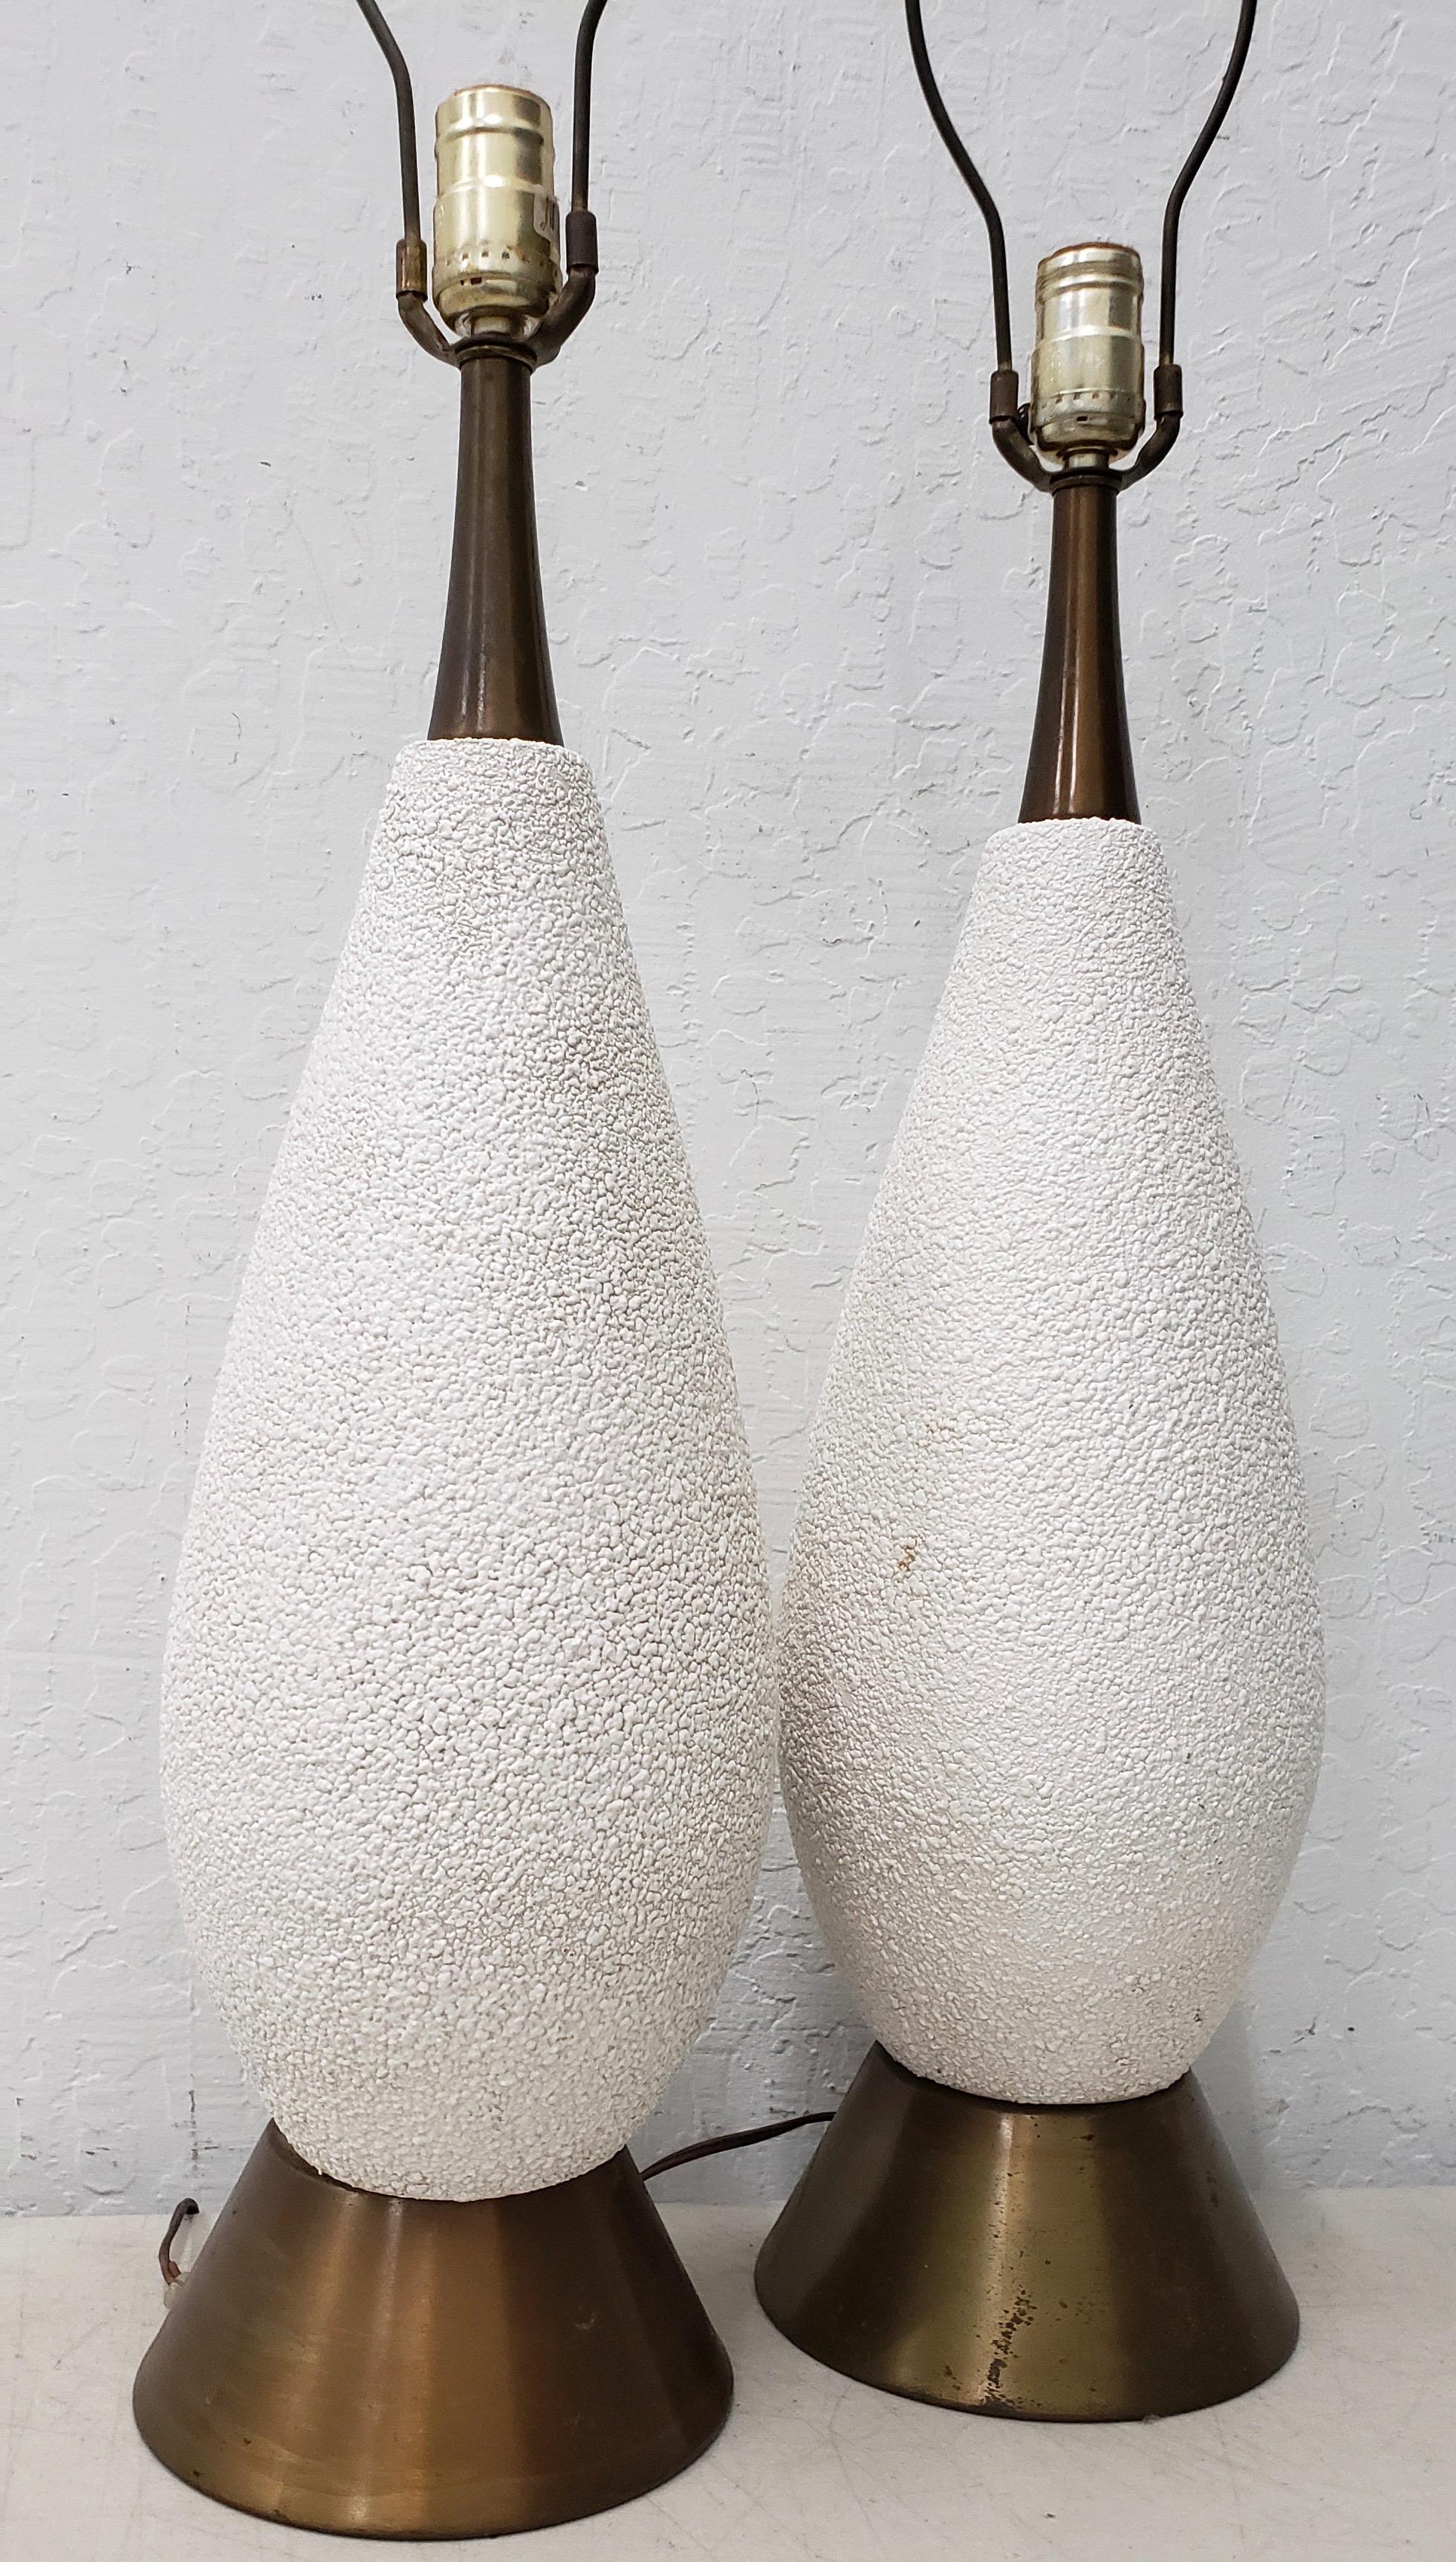 Pair of Mid-Century Modern white textured ceramic table lamps, circa 1950

White textured ceramics. Vintage lamps wired and ready to illuminate.

Each lamp measures 7